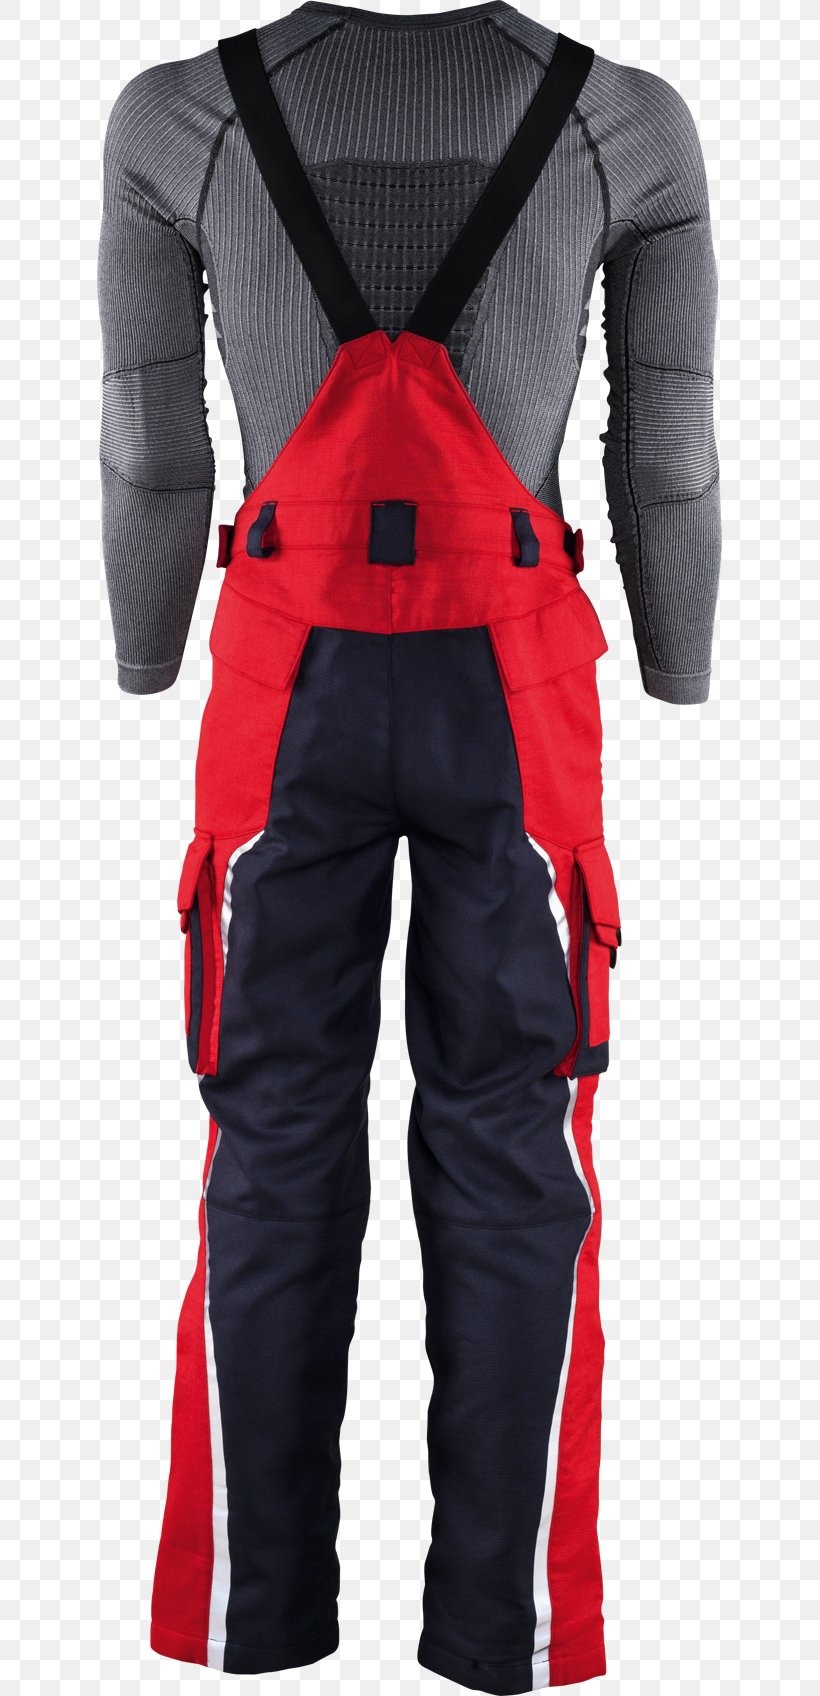 Dry Suit Hockey Protective Pants & Ski Shorts, PNG, 625x1696px, Dry Suit, Hockey, Hockey Protective Pants Ski Shorts, Overall, Personal Protective Equipment Download Free